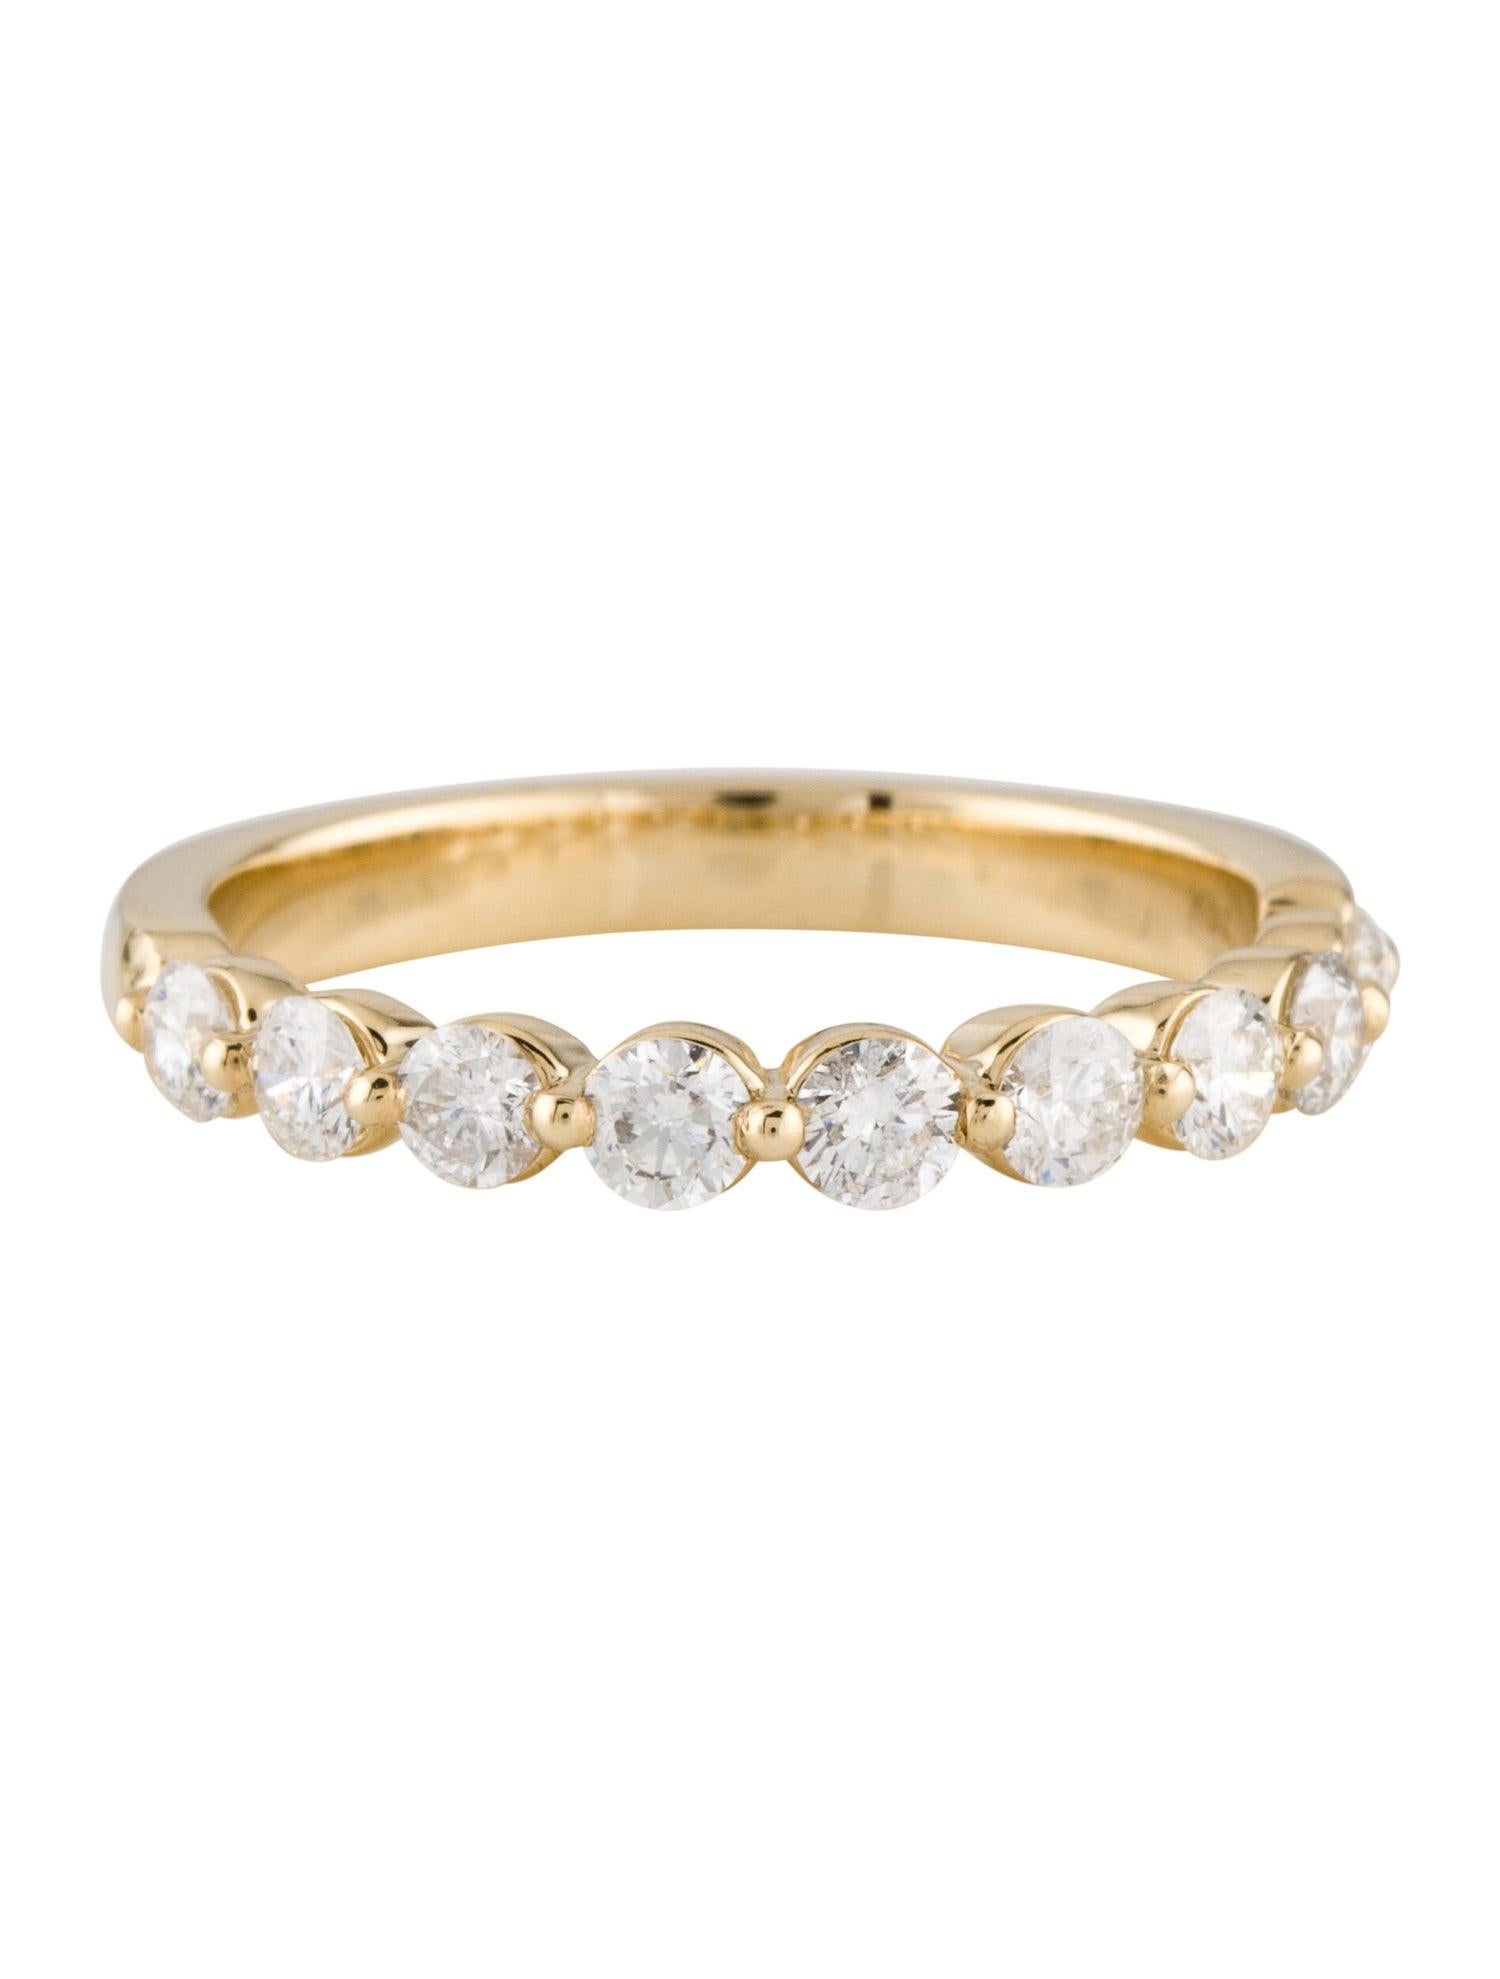 Contemporary 14K Yellow Gold Diamond 0.75ct Band for Her For Sale